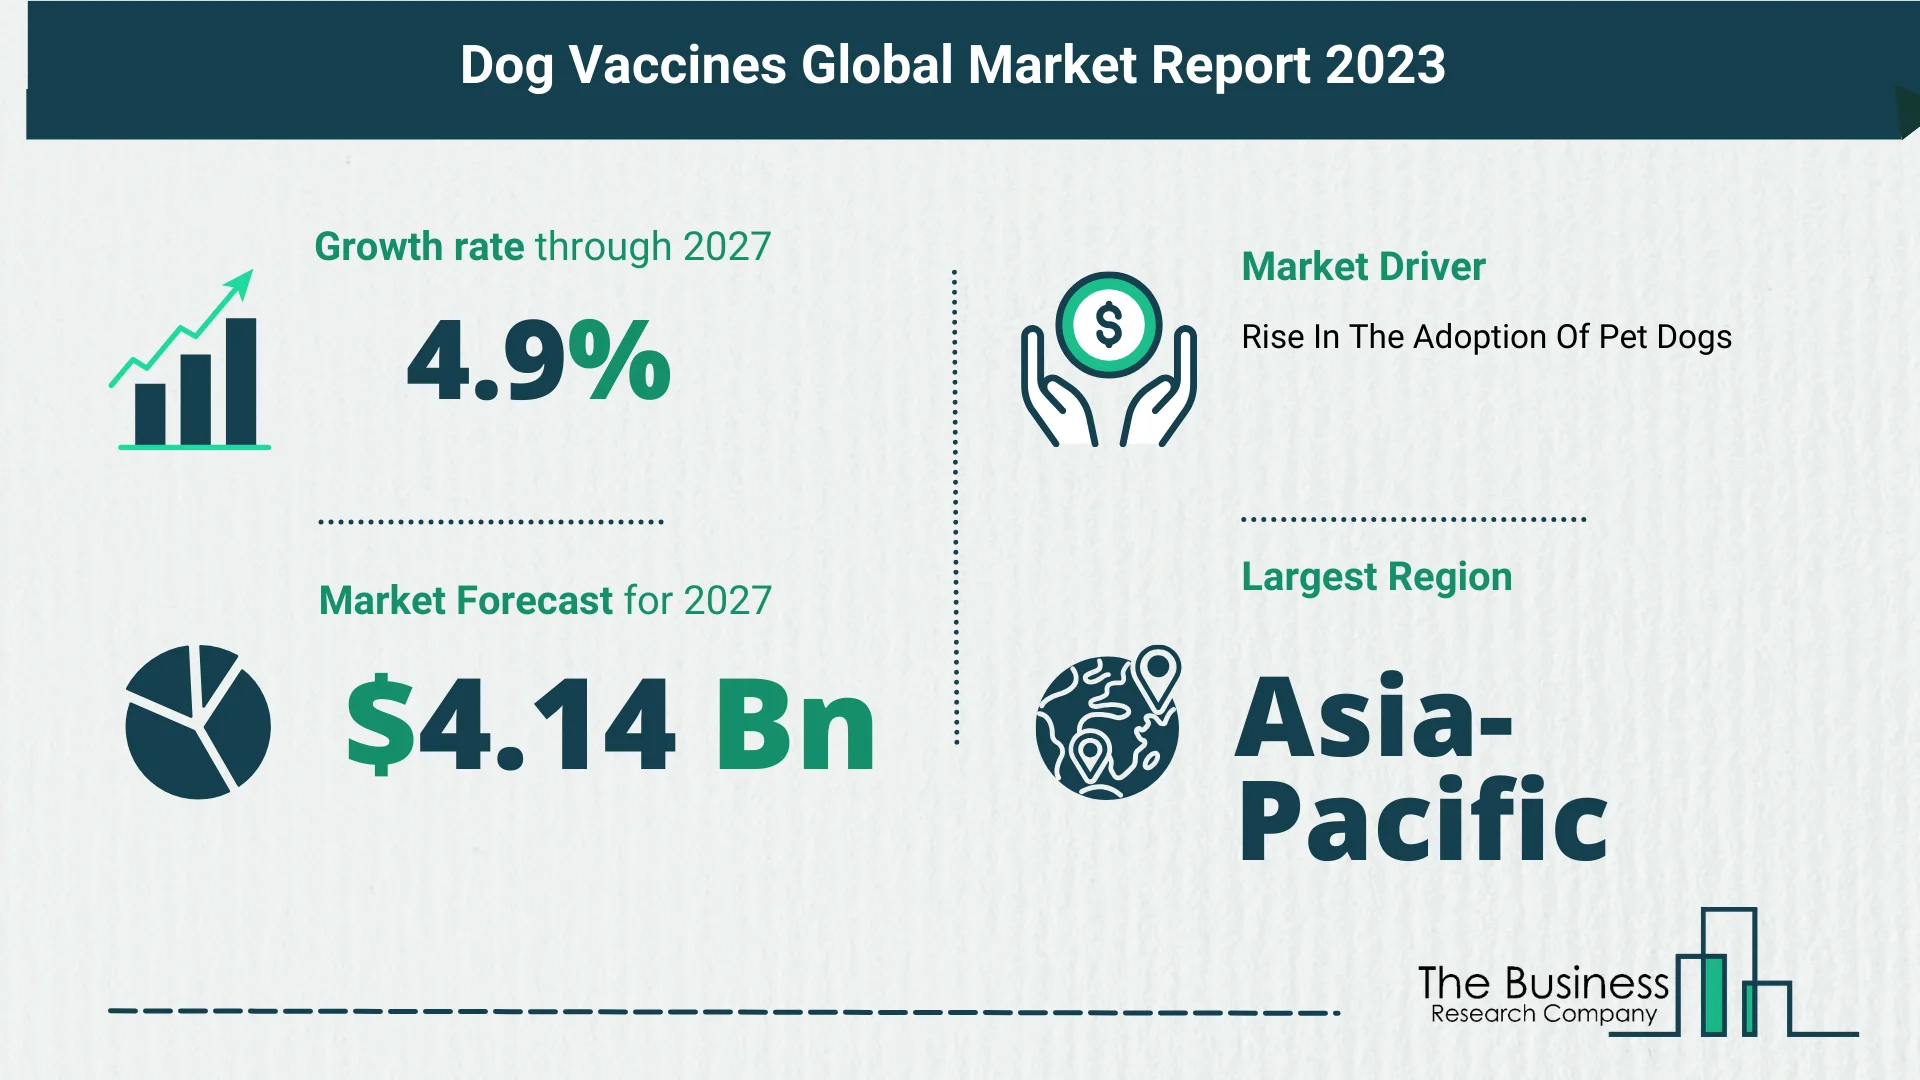 Global Dog Vaccines Market Analysis: Estimated Market Size And Growth Rate